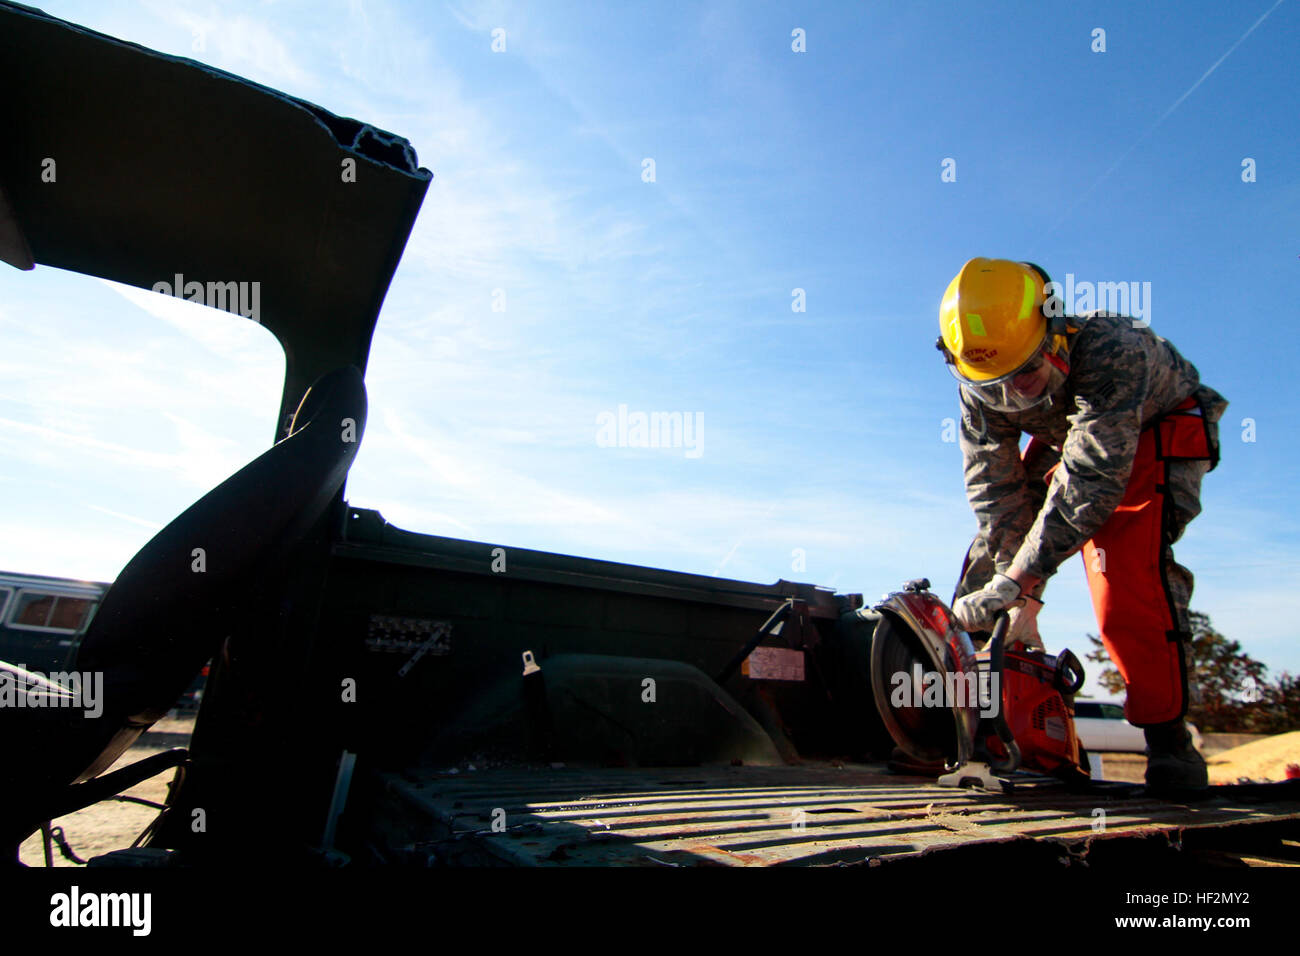 A U.S. Air Force Airmen from the New Jersey Air National Guard's 177th Fighter Wing uses a rescue saw on a truck at Warren Grove Gunnery Range, N.J., Nov. 8, 2014. The Airman, who is part of the Crashed Damaged Disabled Aircraft Recovery (CDDAR) team, was getting familiarization training on new equipment. (U.S. Air National Guard photo by Tech. Sgt. Matt Hecht/Released) Aircraft recovery team trains with reclamation equipment 141108-Z-NI803-196 Stock Photo